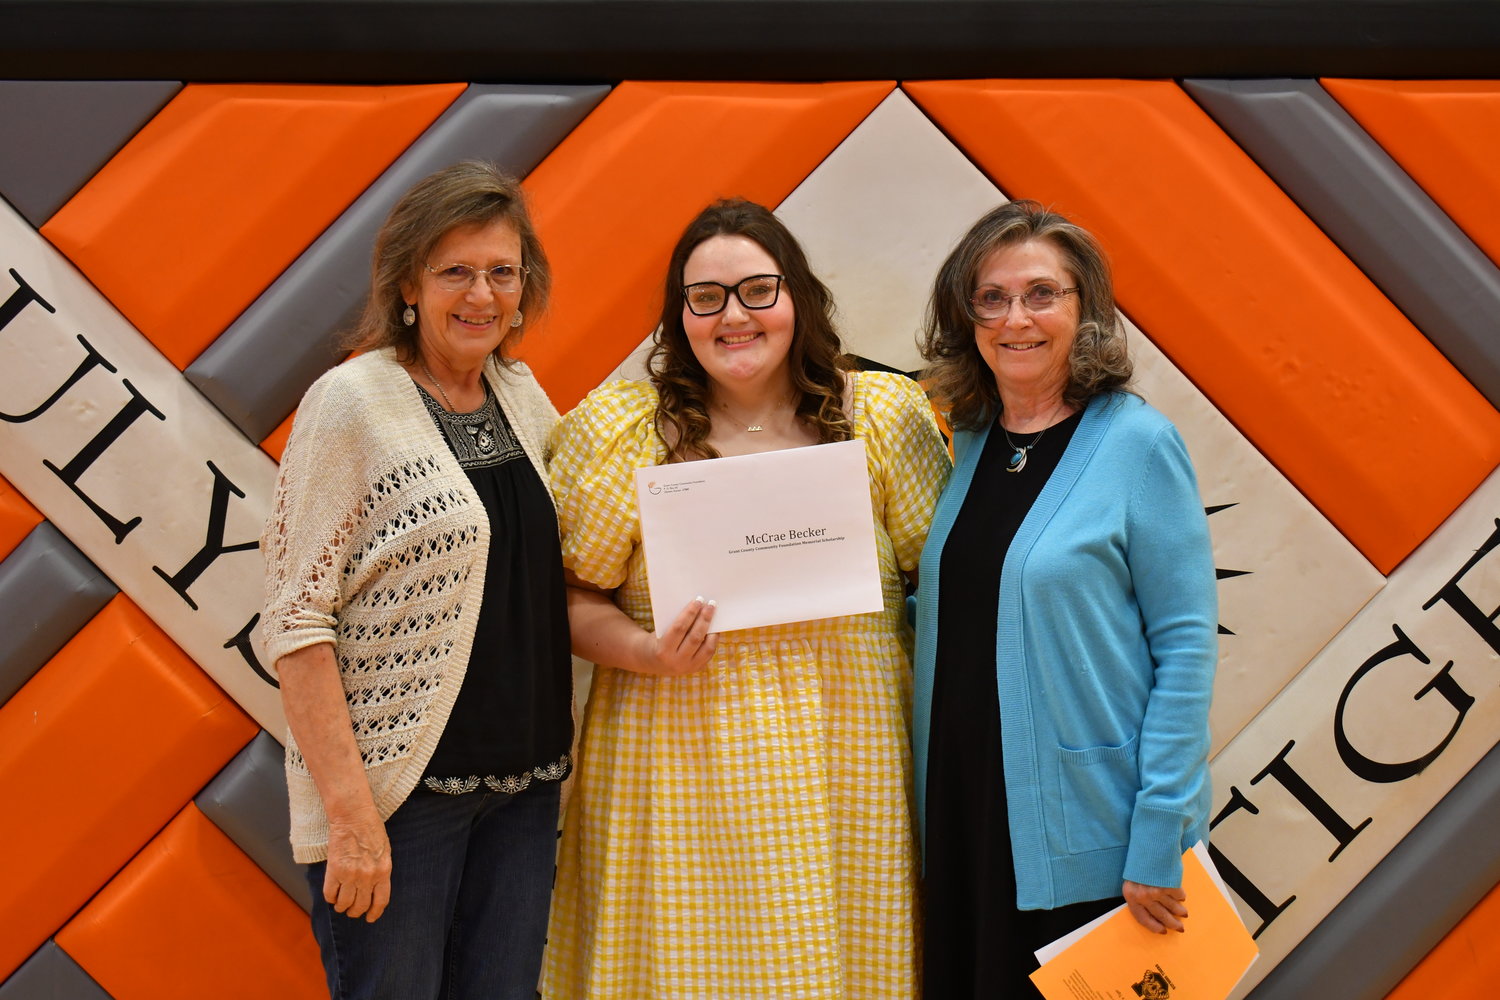 Senior Awards — McCrae Becker was given the Grant County Community Foundation Memorial Scholarship by Sue Ellen Borthwick and Judy Keusler on Friday, May 13, 2022.